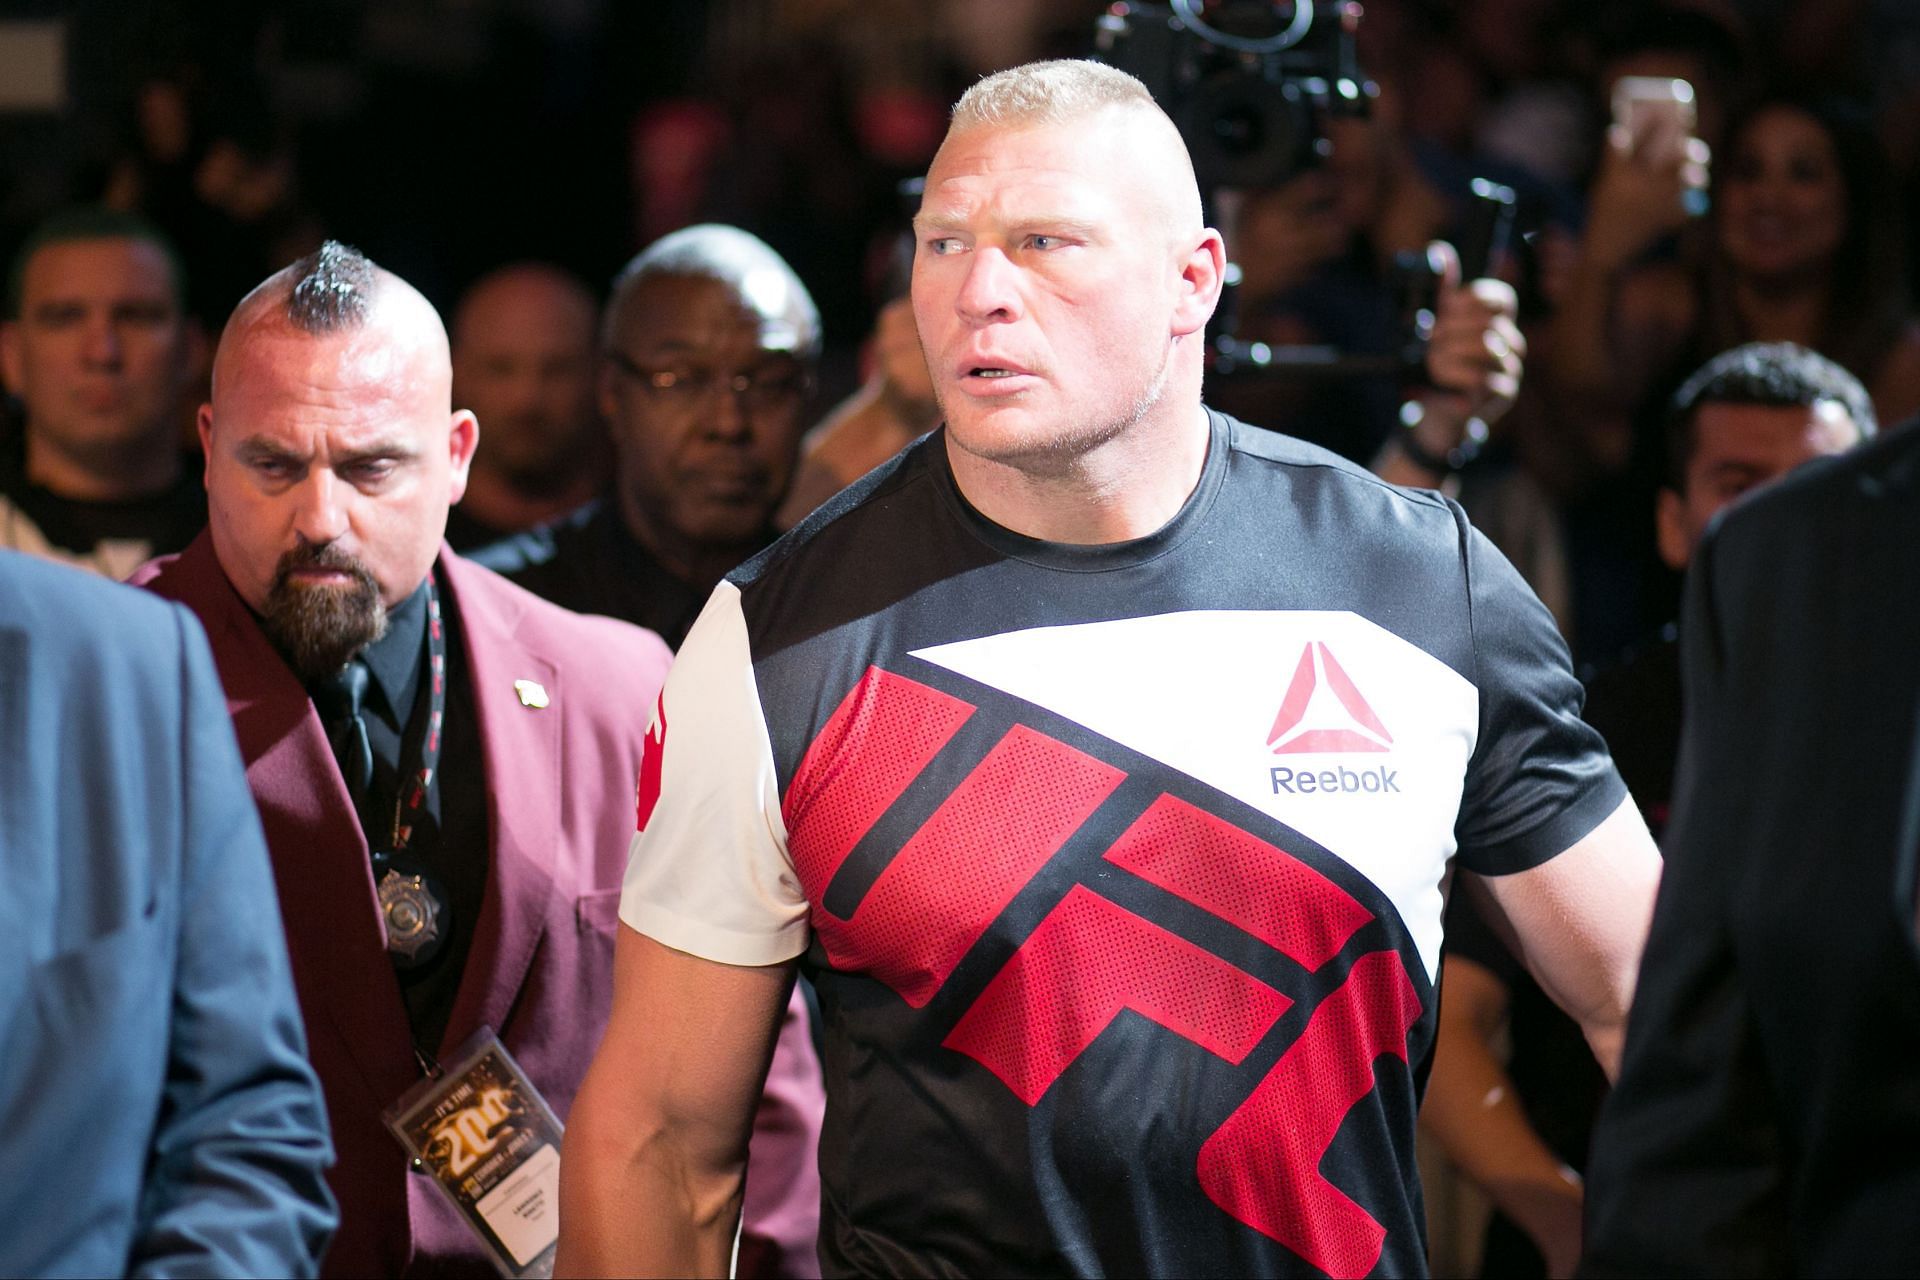 Brock Lesnar alienated some of his fighters on TUF 13